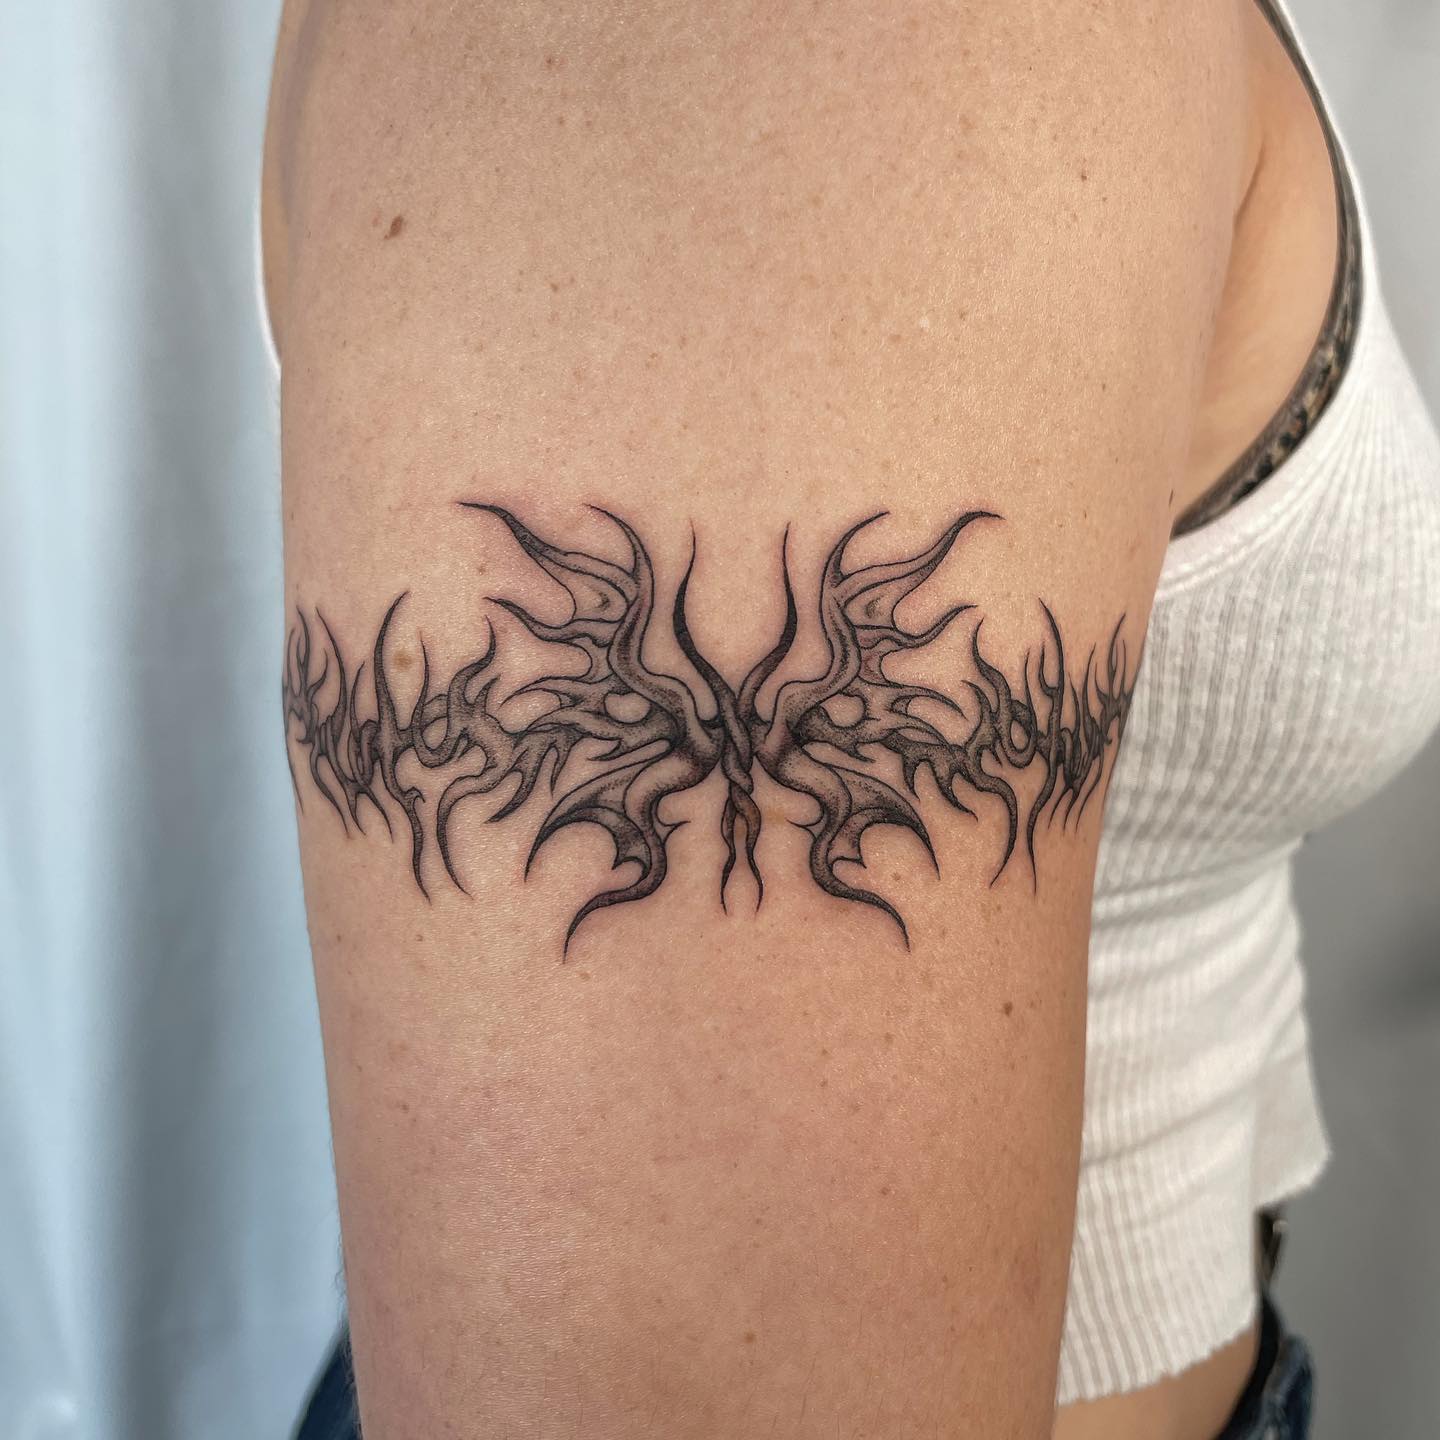 A different type of barbed wire can take your tattoo to a whole different level. In the middle of this arm cover up barbed wire, there is a butterfly which is made of wire. Butterflies symbolize rebirth and they will suit with your protection wire. Go for it to protect your rebirth.